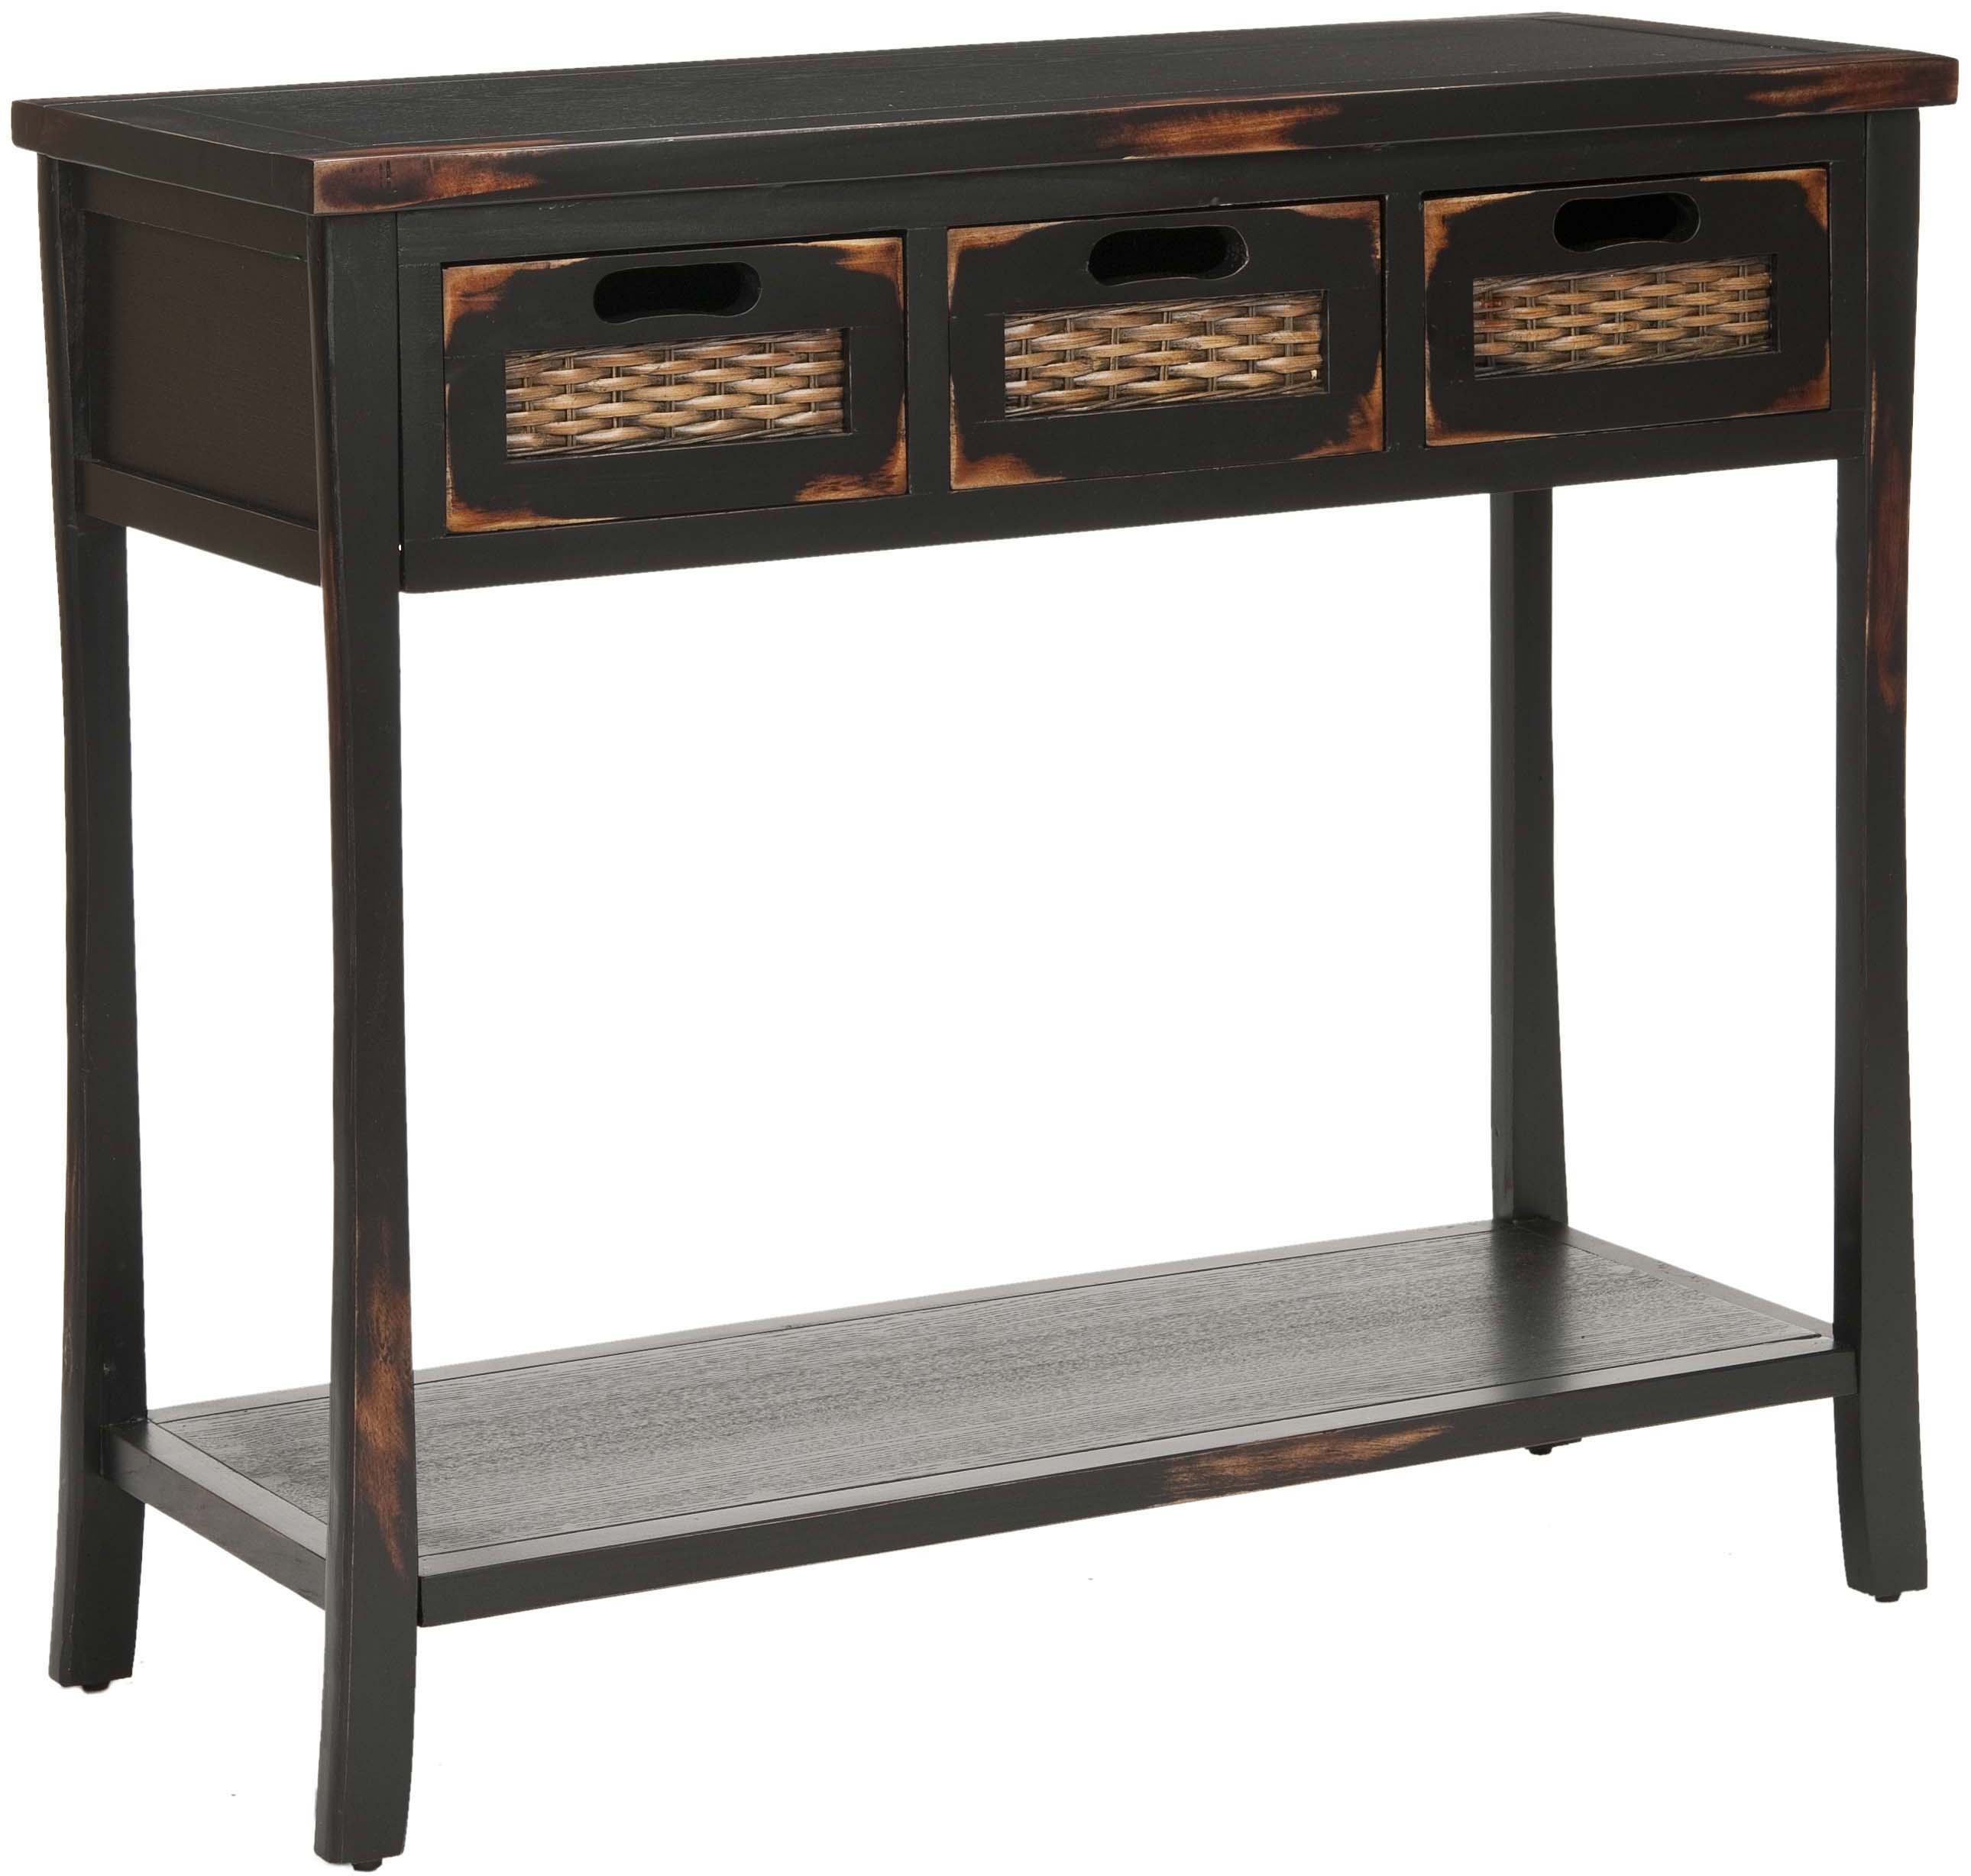 Autumn 3 Drawer Console - Distressed Black - Arlo Home - Image 1